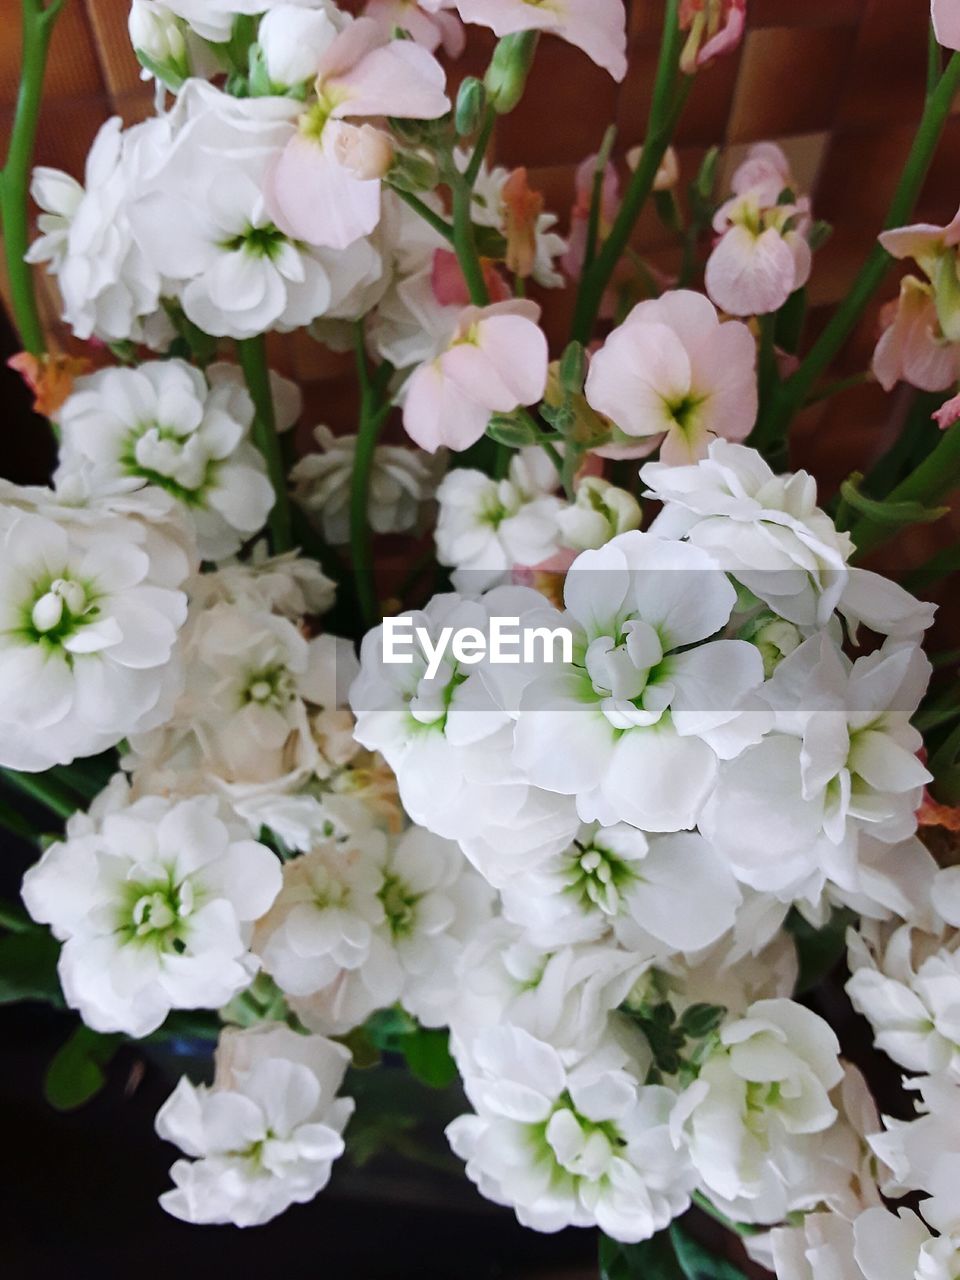 CLOSE-UP OF FRESH WHITE FLOWERS BLOOMING IN SPRING